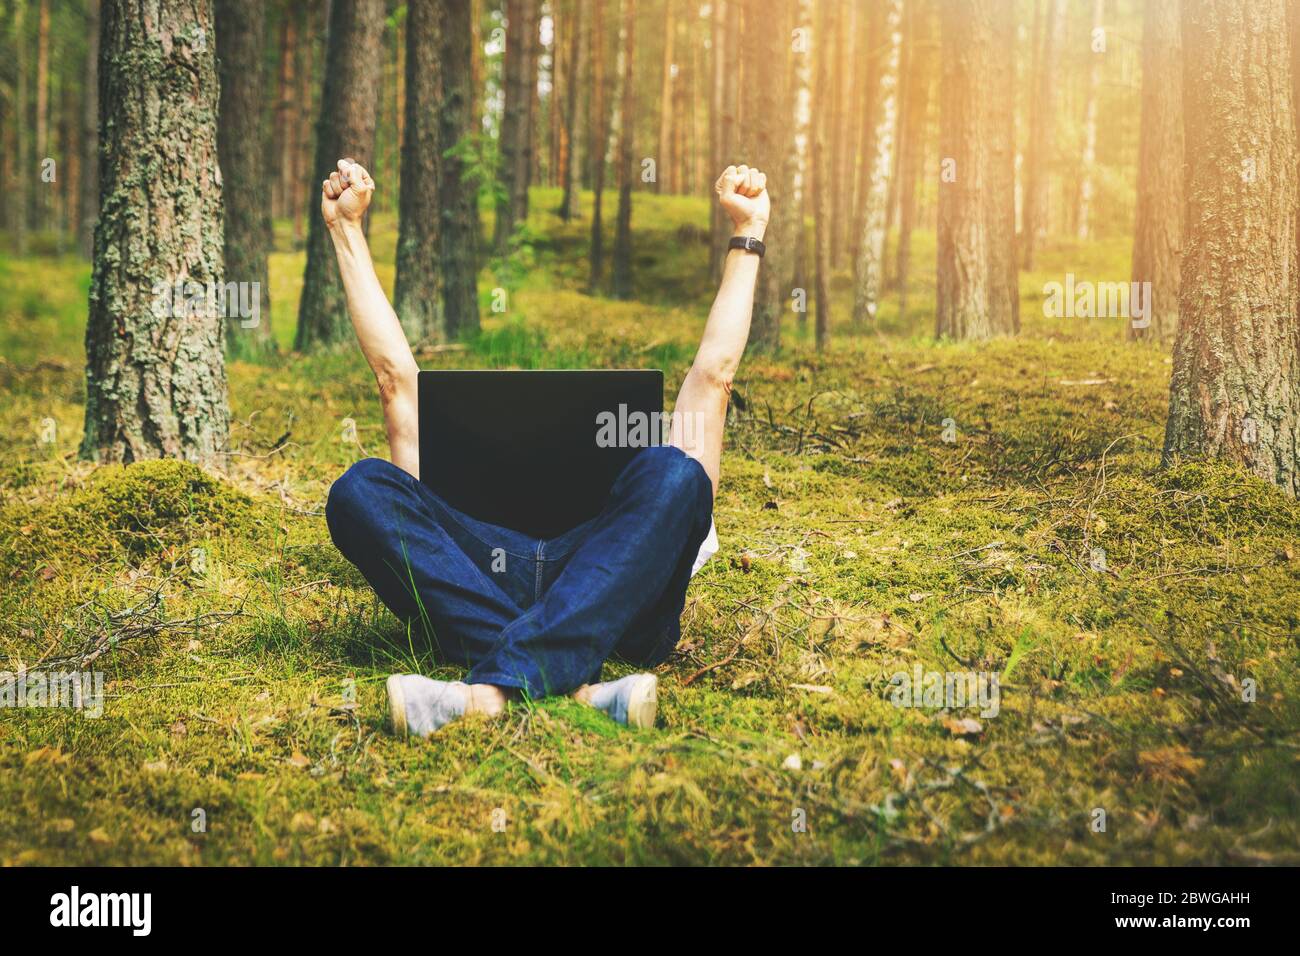 telecommuting - man with laptop laying in the moss in the forest with hands raised Stock Photo